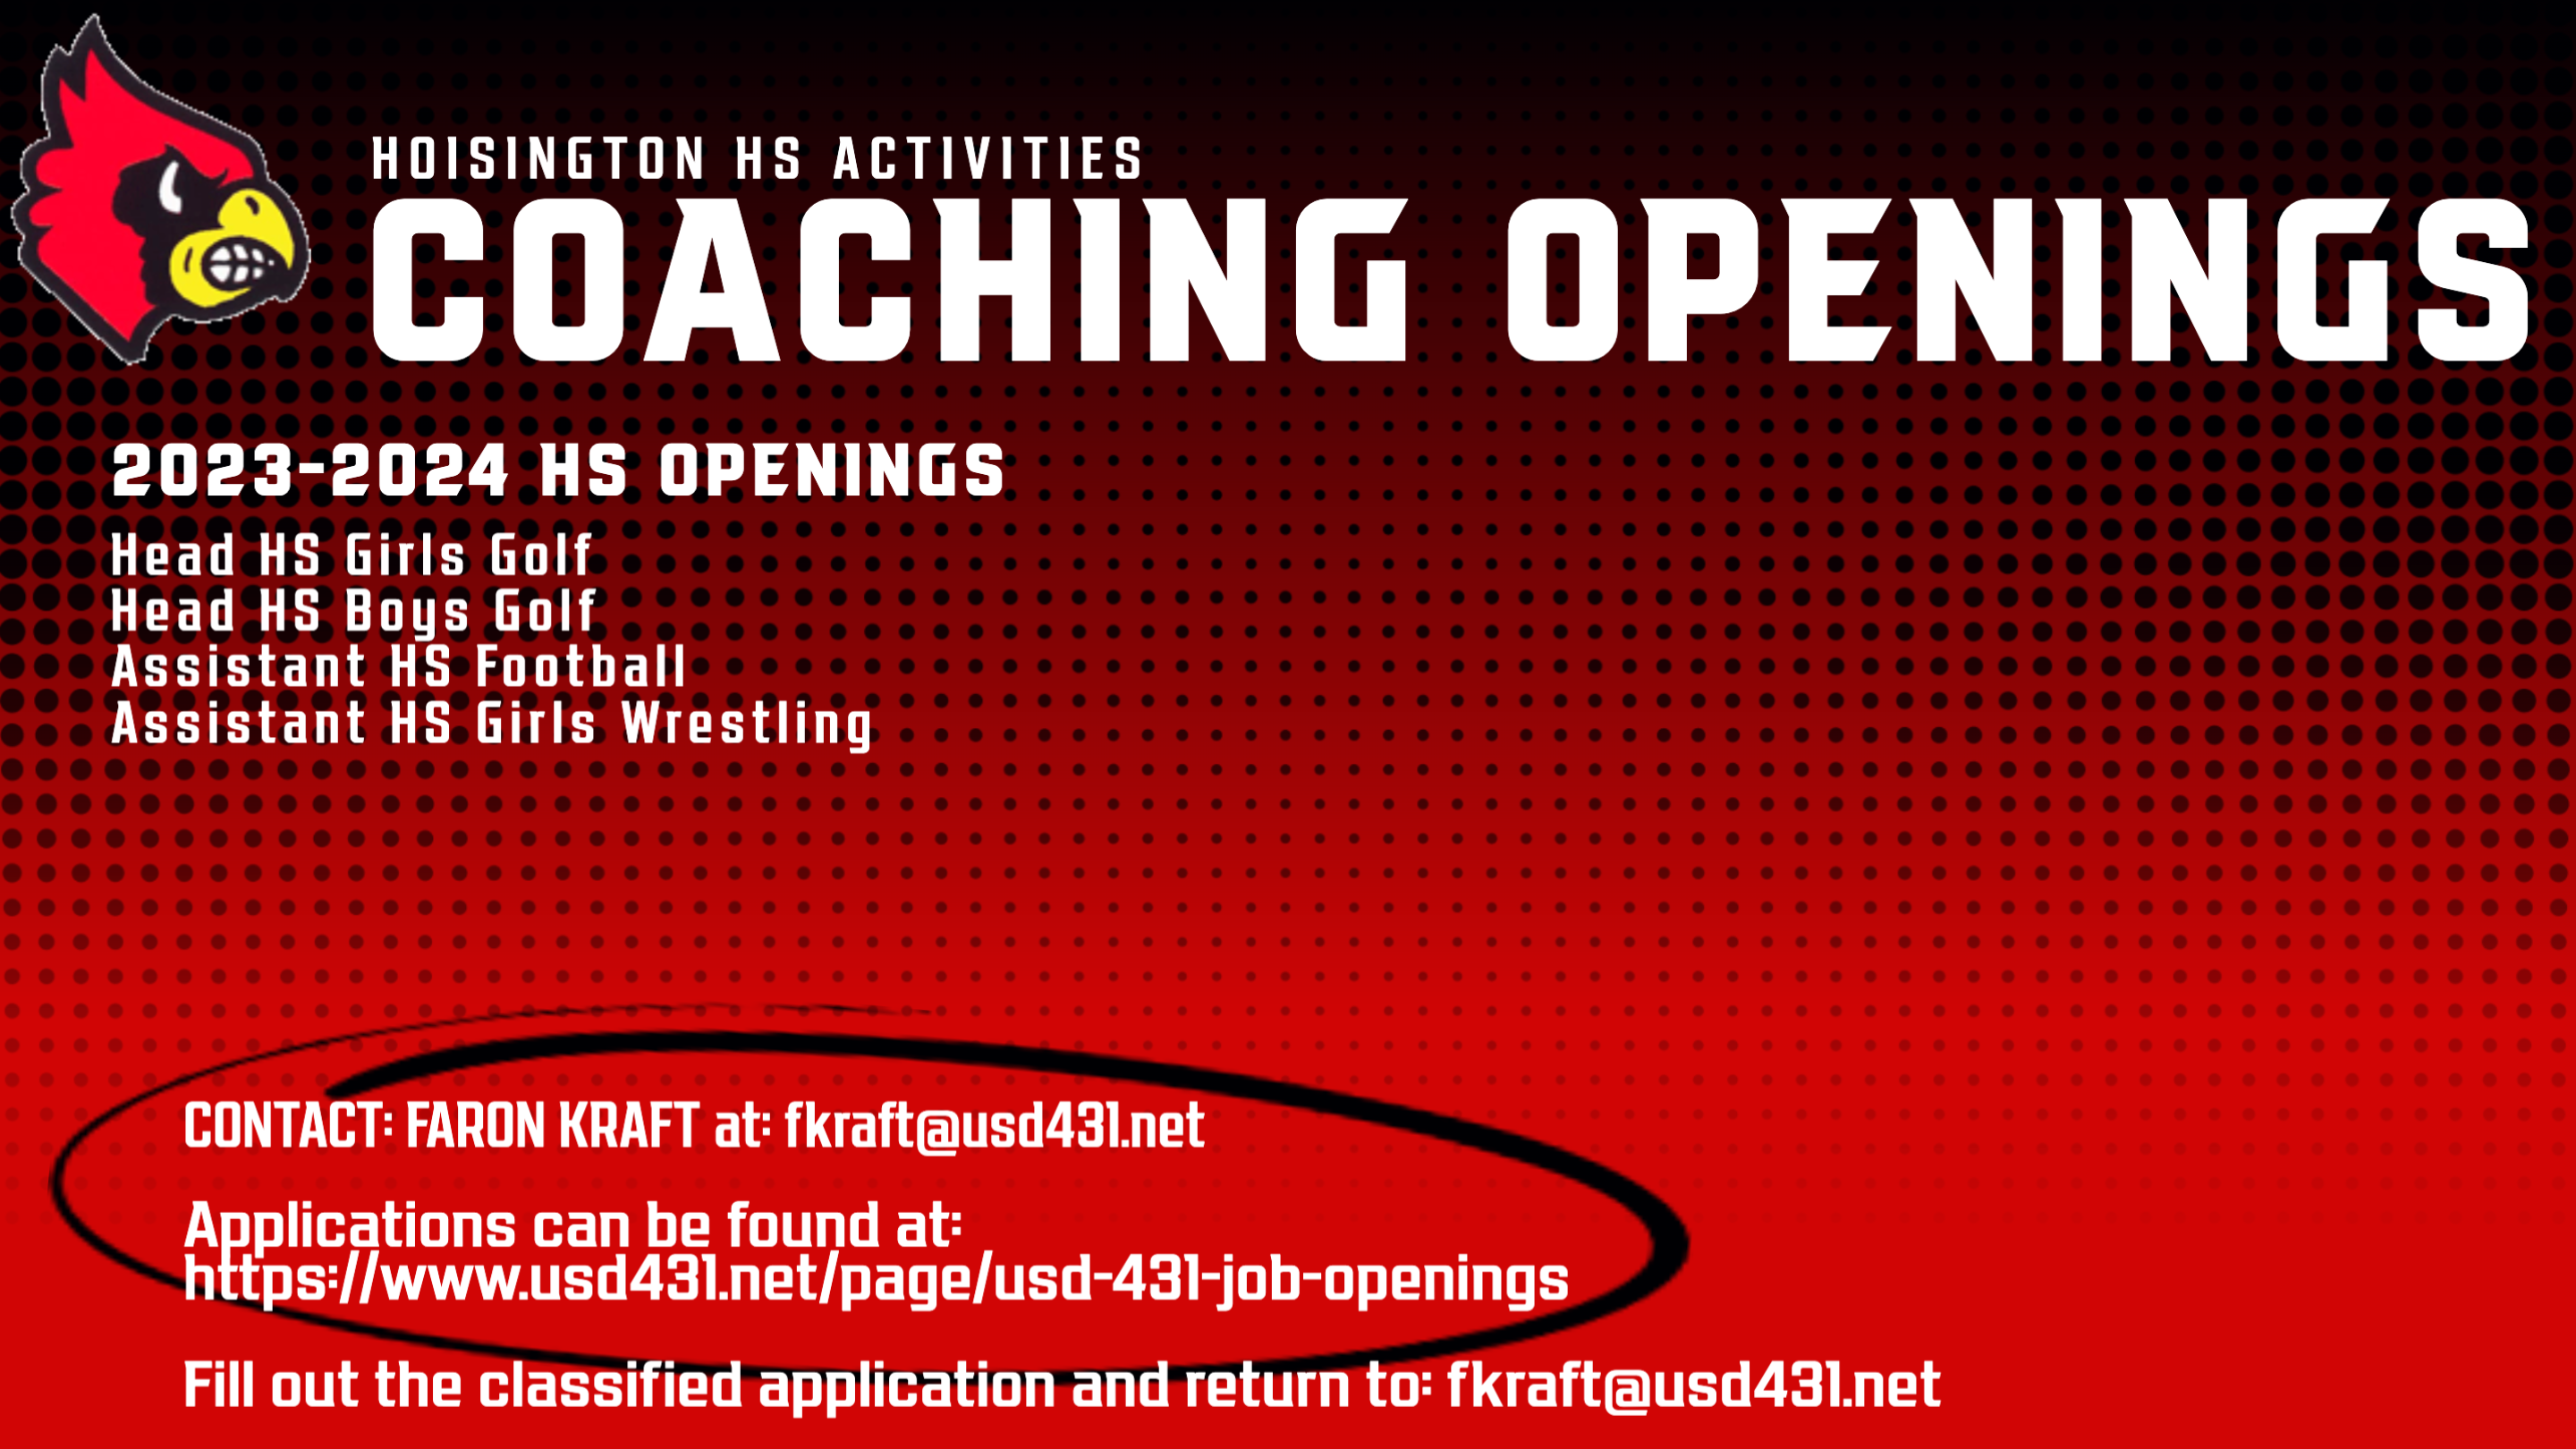 hhs-coach-openings